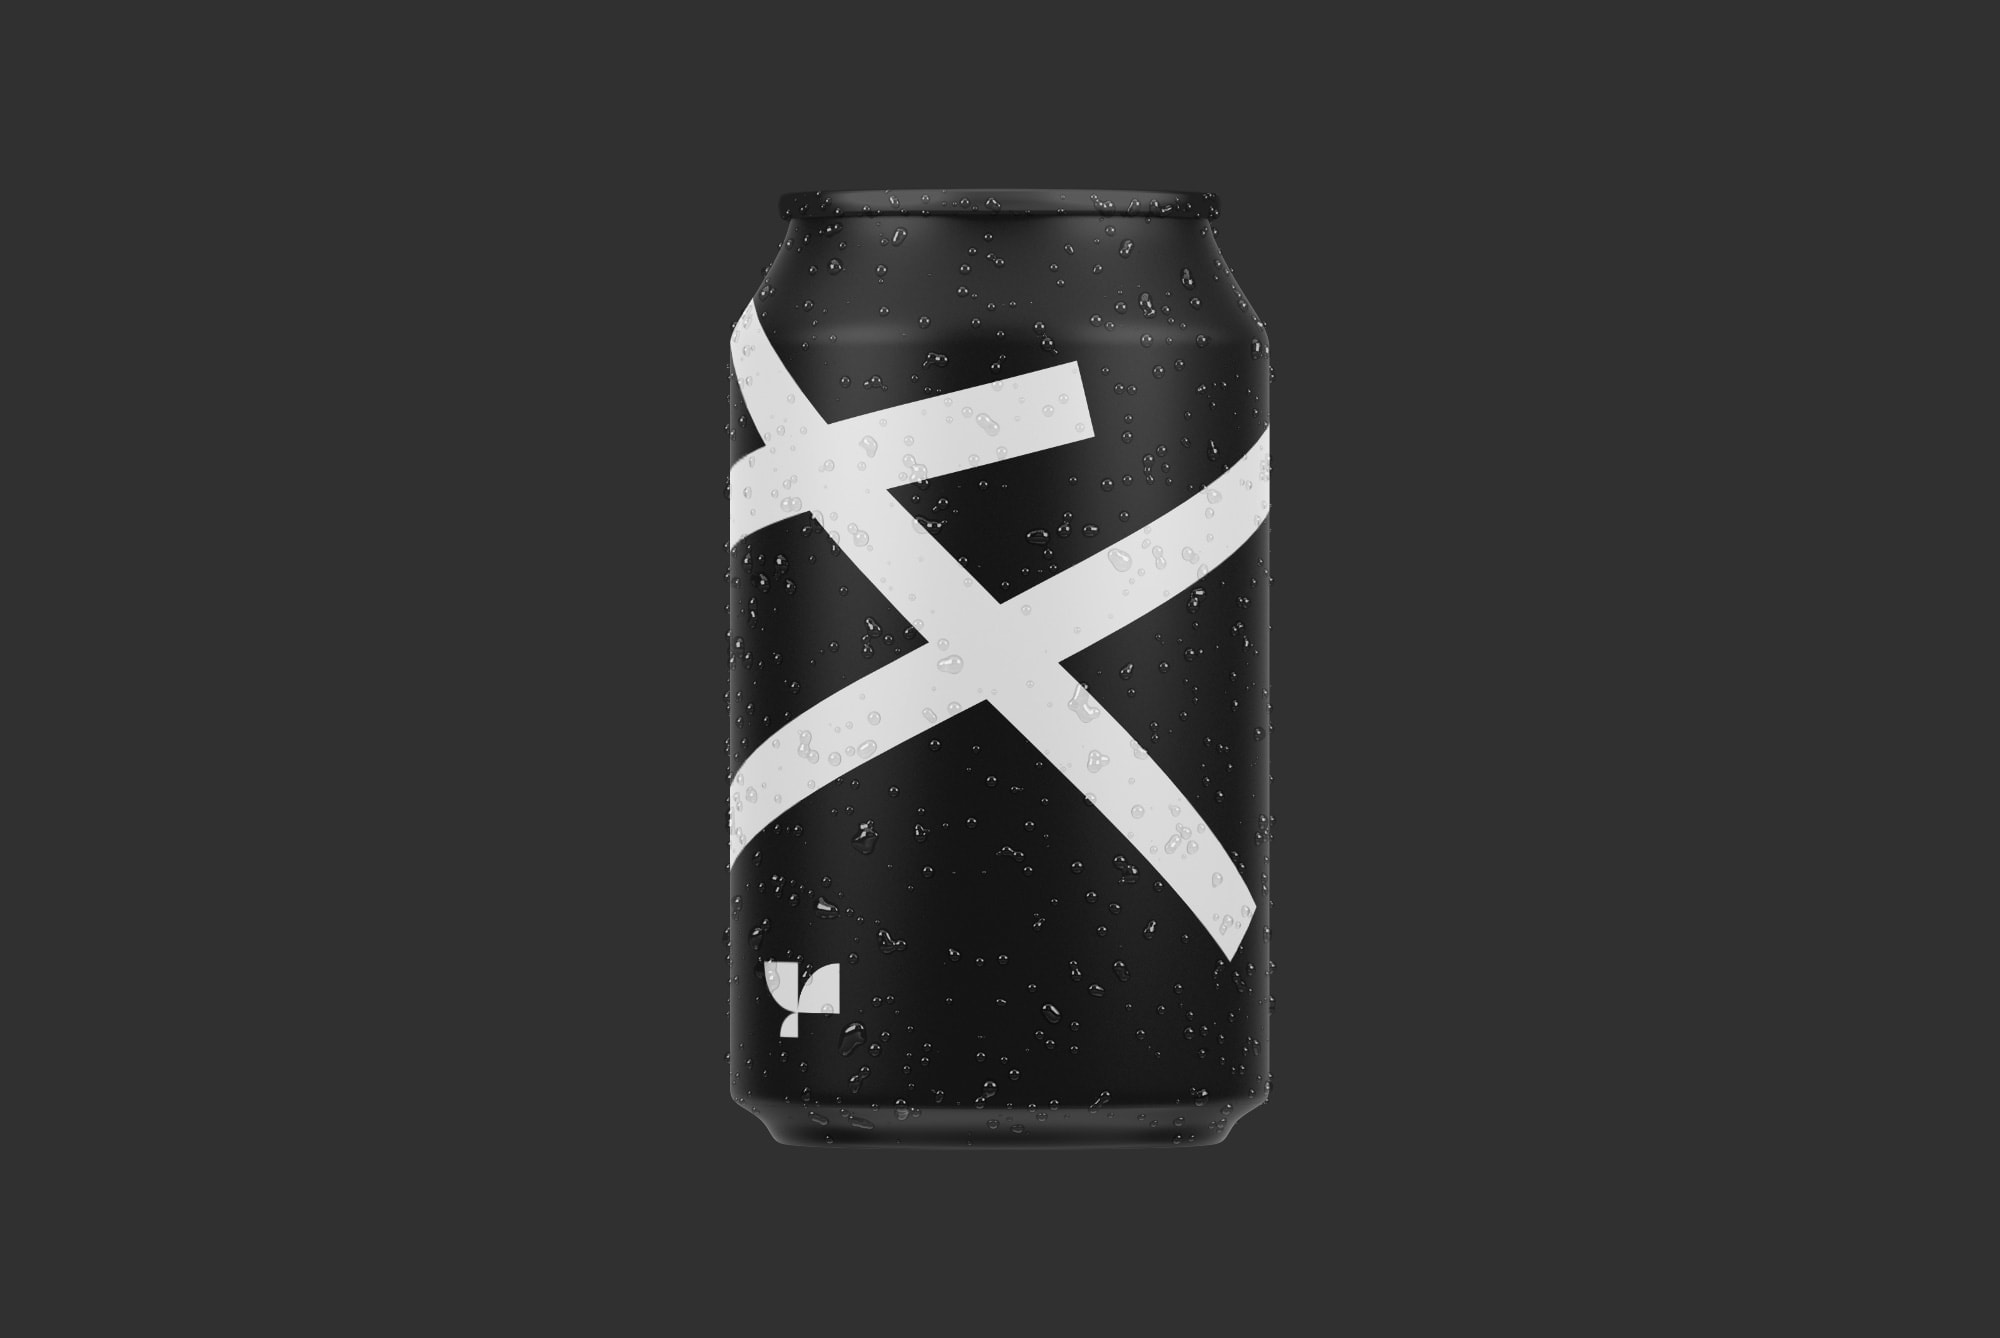 Realistic soda can mockup with black and white design, water droplets, on a dark background, ideal for branding and packaging presentation.